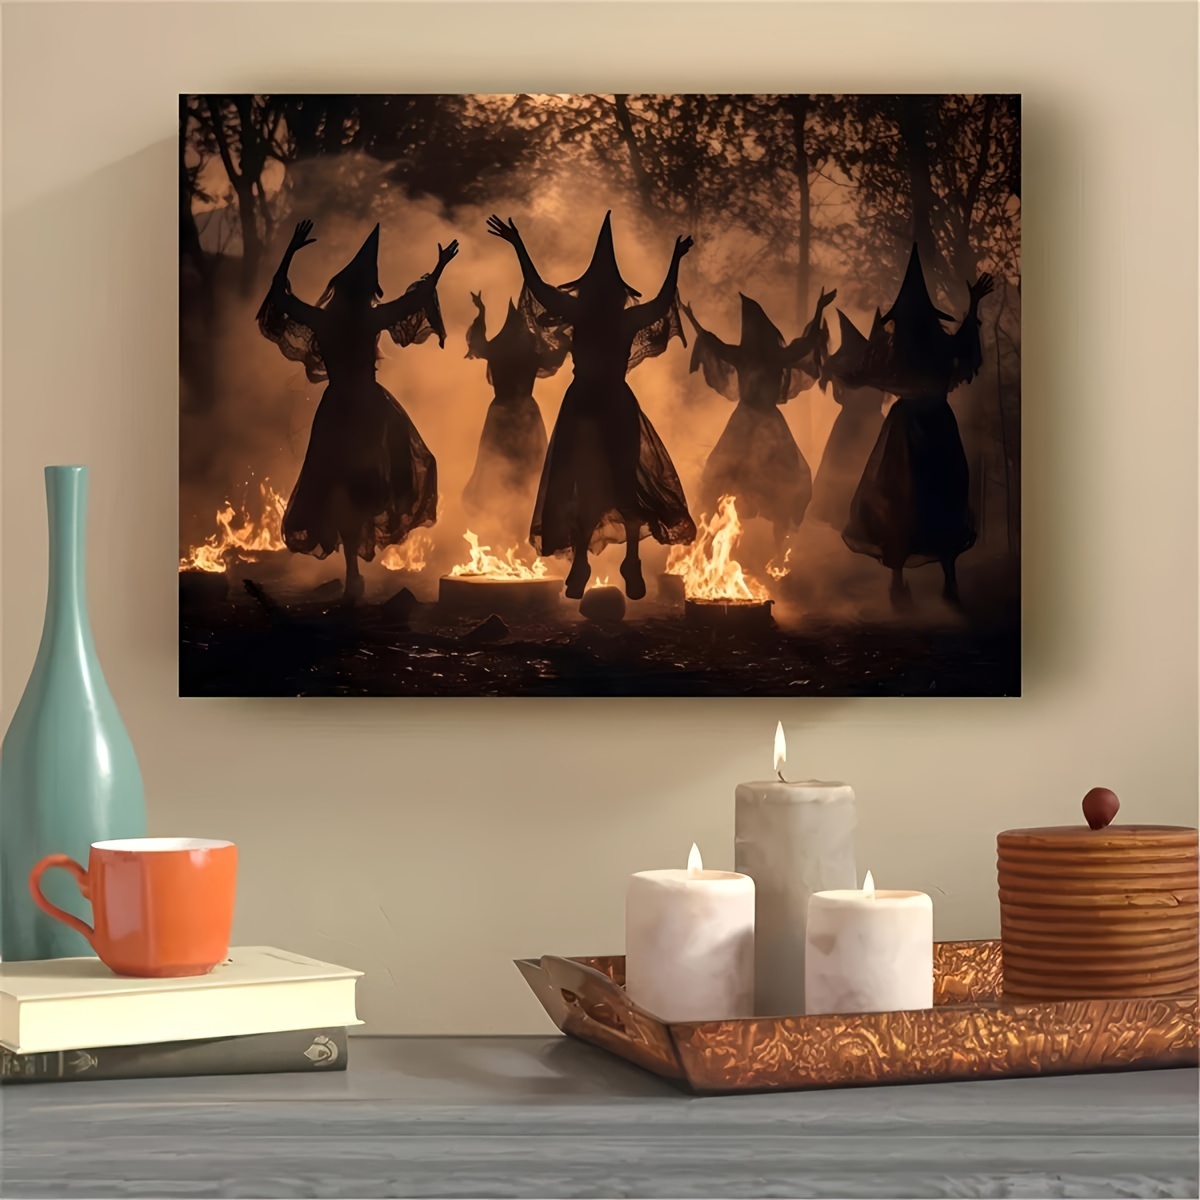 

Country Rustic Style Halloween Wall Art, "witches' Dance" Canvas Print - Horror Theme, Vintage Modern Home Decoration For Living Room, Bedroom, Office - No Electricity Needed, No Feathers